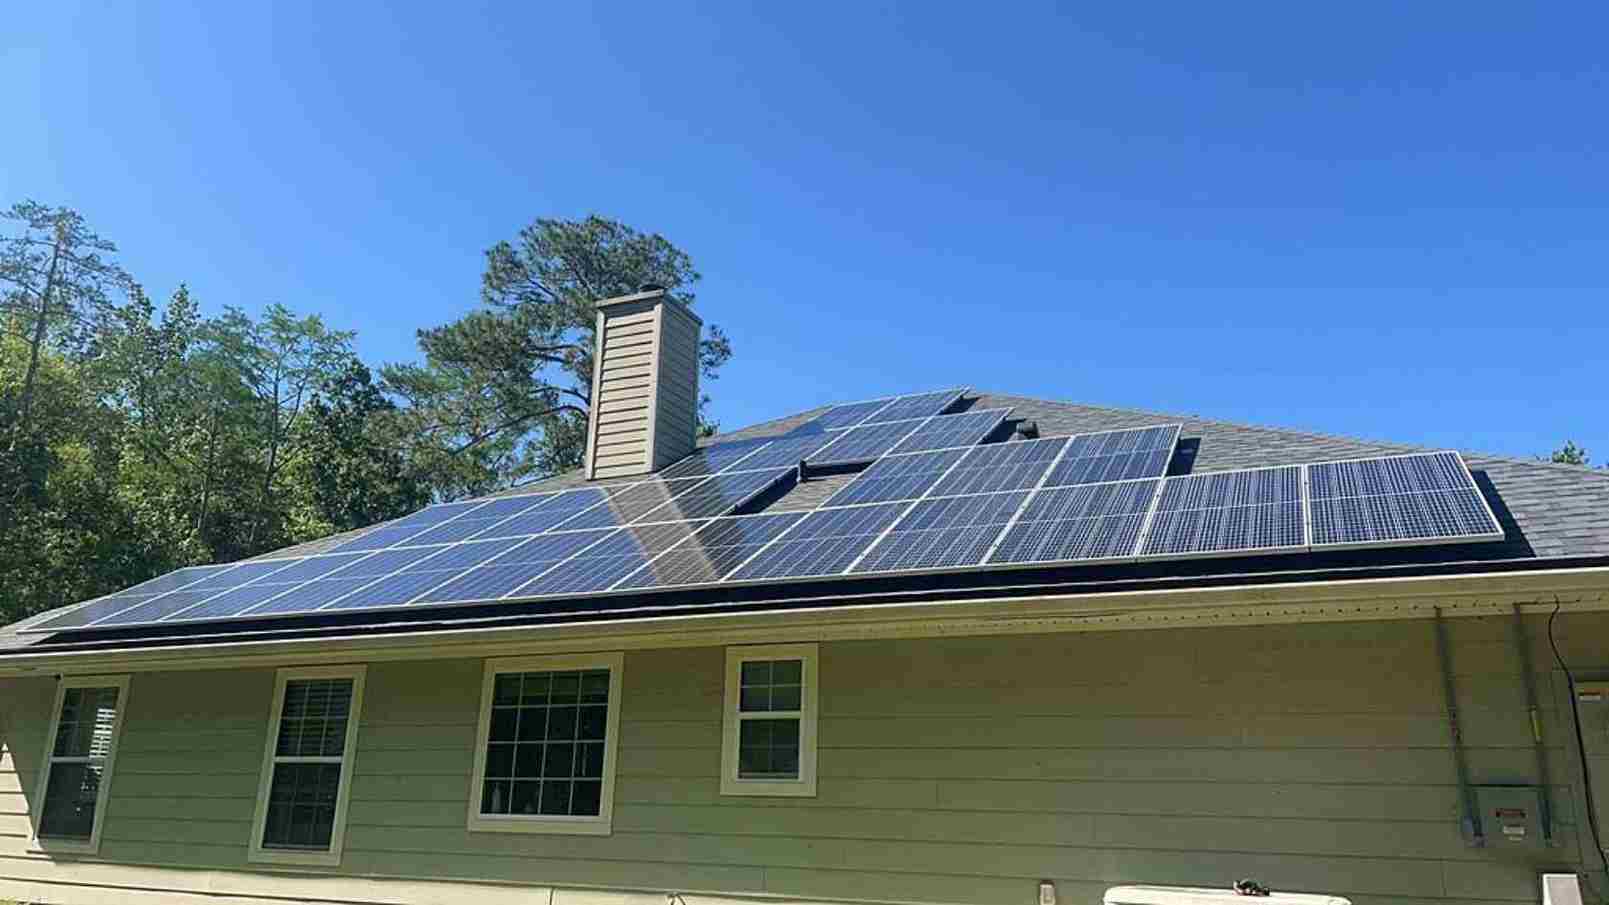 Tier 1 Solar Panels on residential home in Florida